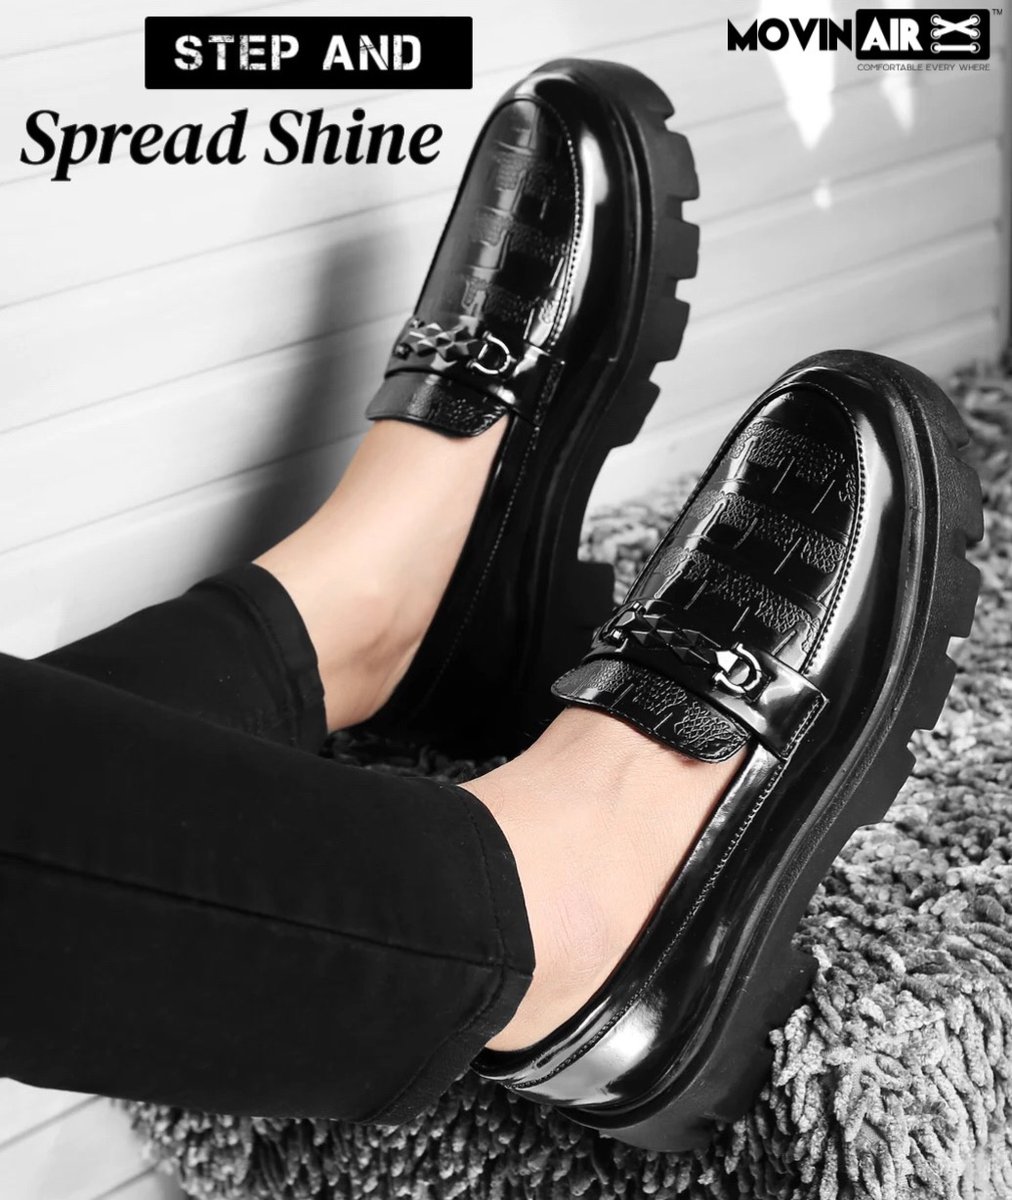 Step and Spread Shine. 🔥🔥

Get this luxurious pair of shoes and look Dashing. 😎
.
movinairshoes.com
.
#explore #highsole 
#Shoes #ThursdayThoughts #Trending #ShoesdayTuesday #SHINee #quality #comfort #Twitter #TrendingNow #shoestime #party #footwear